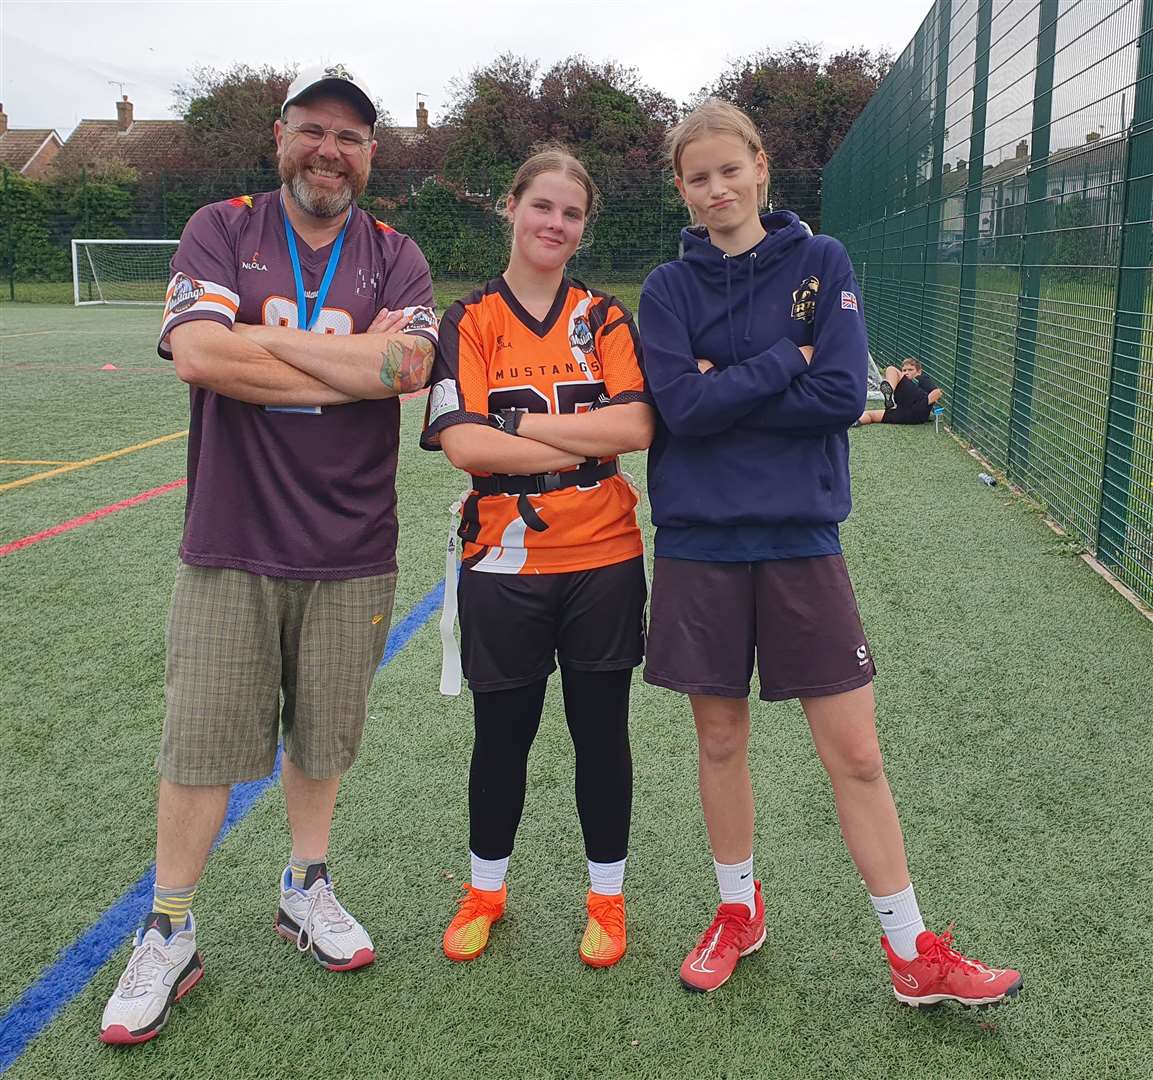 Thanet Mustangs coach Phil Cartwright with players Darna Kelleher and Matilda Deakins